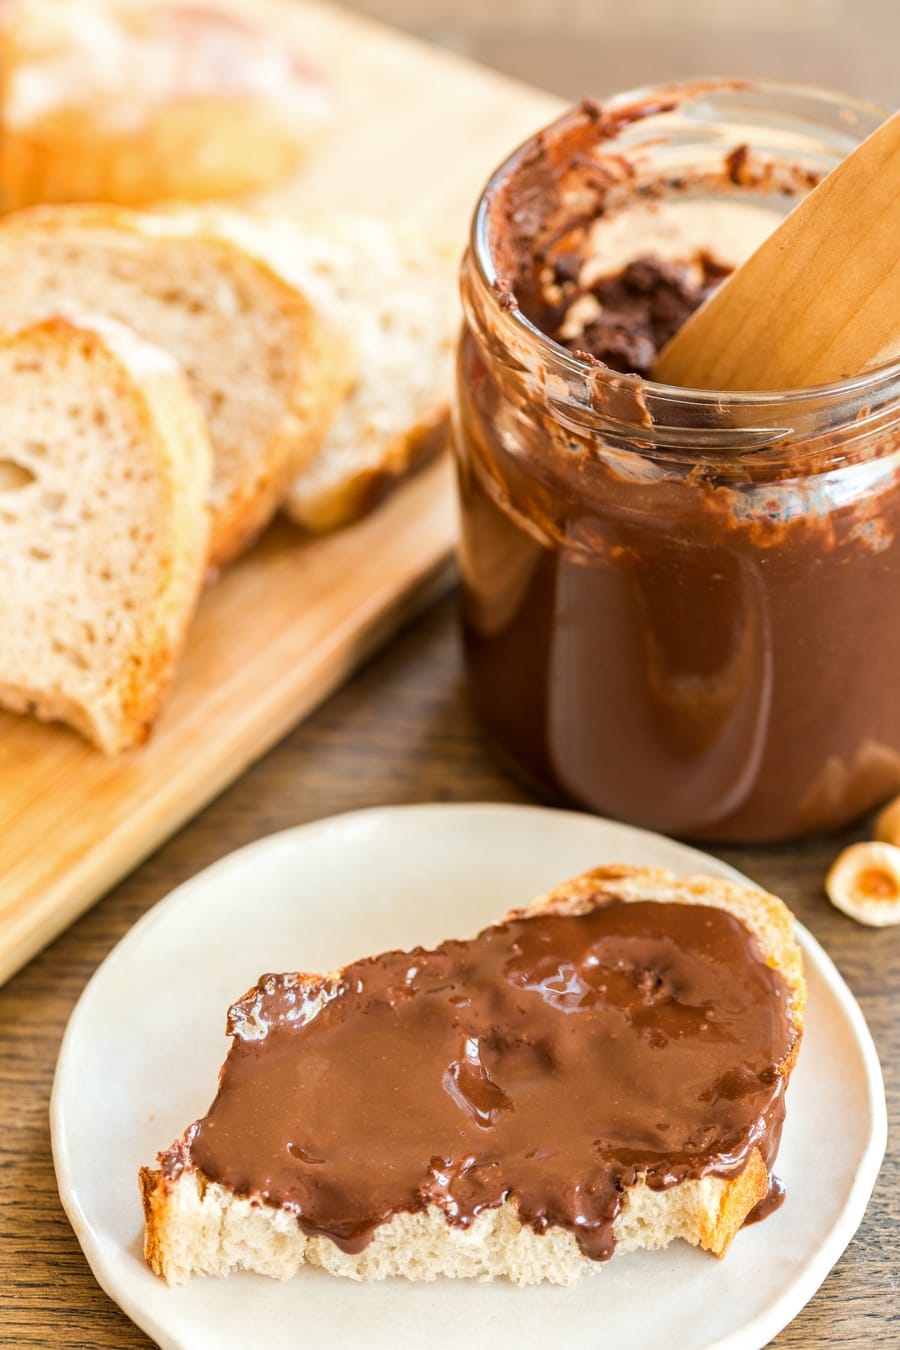 A jar of homemade dark chocolate nutella, some spread on the bread in front of it.